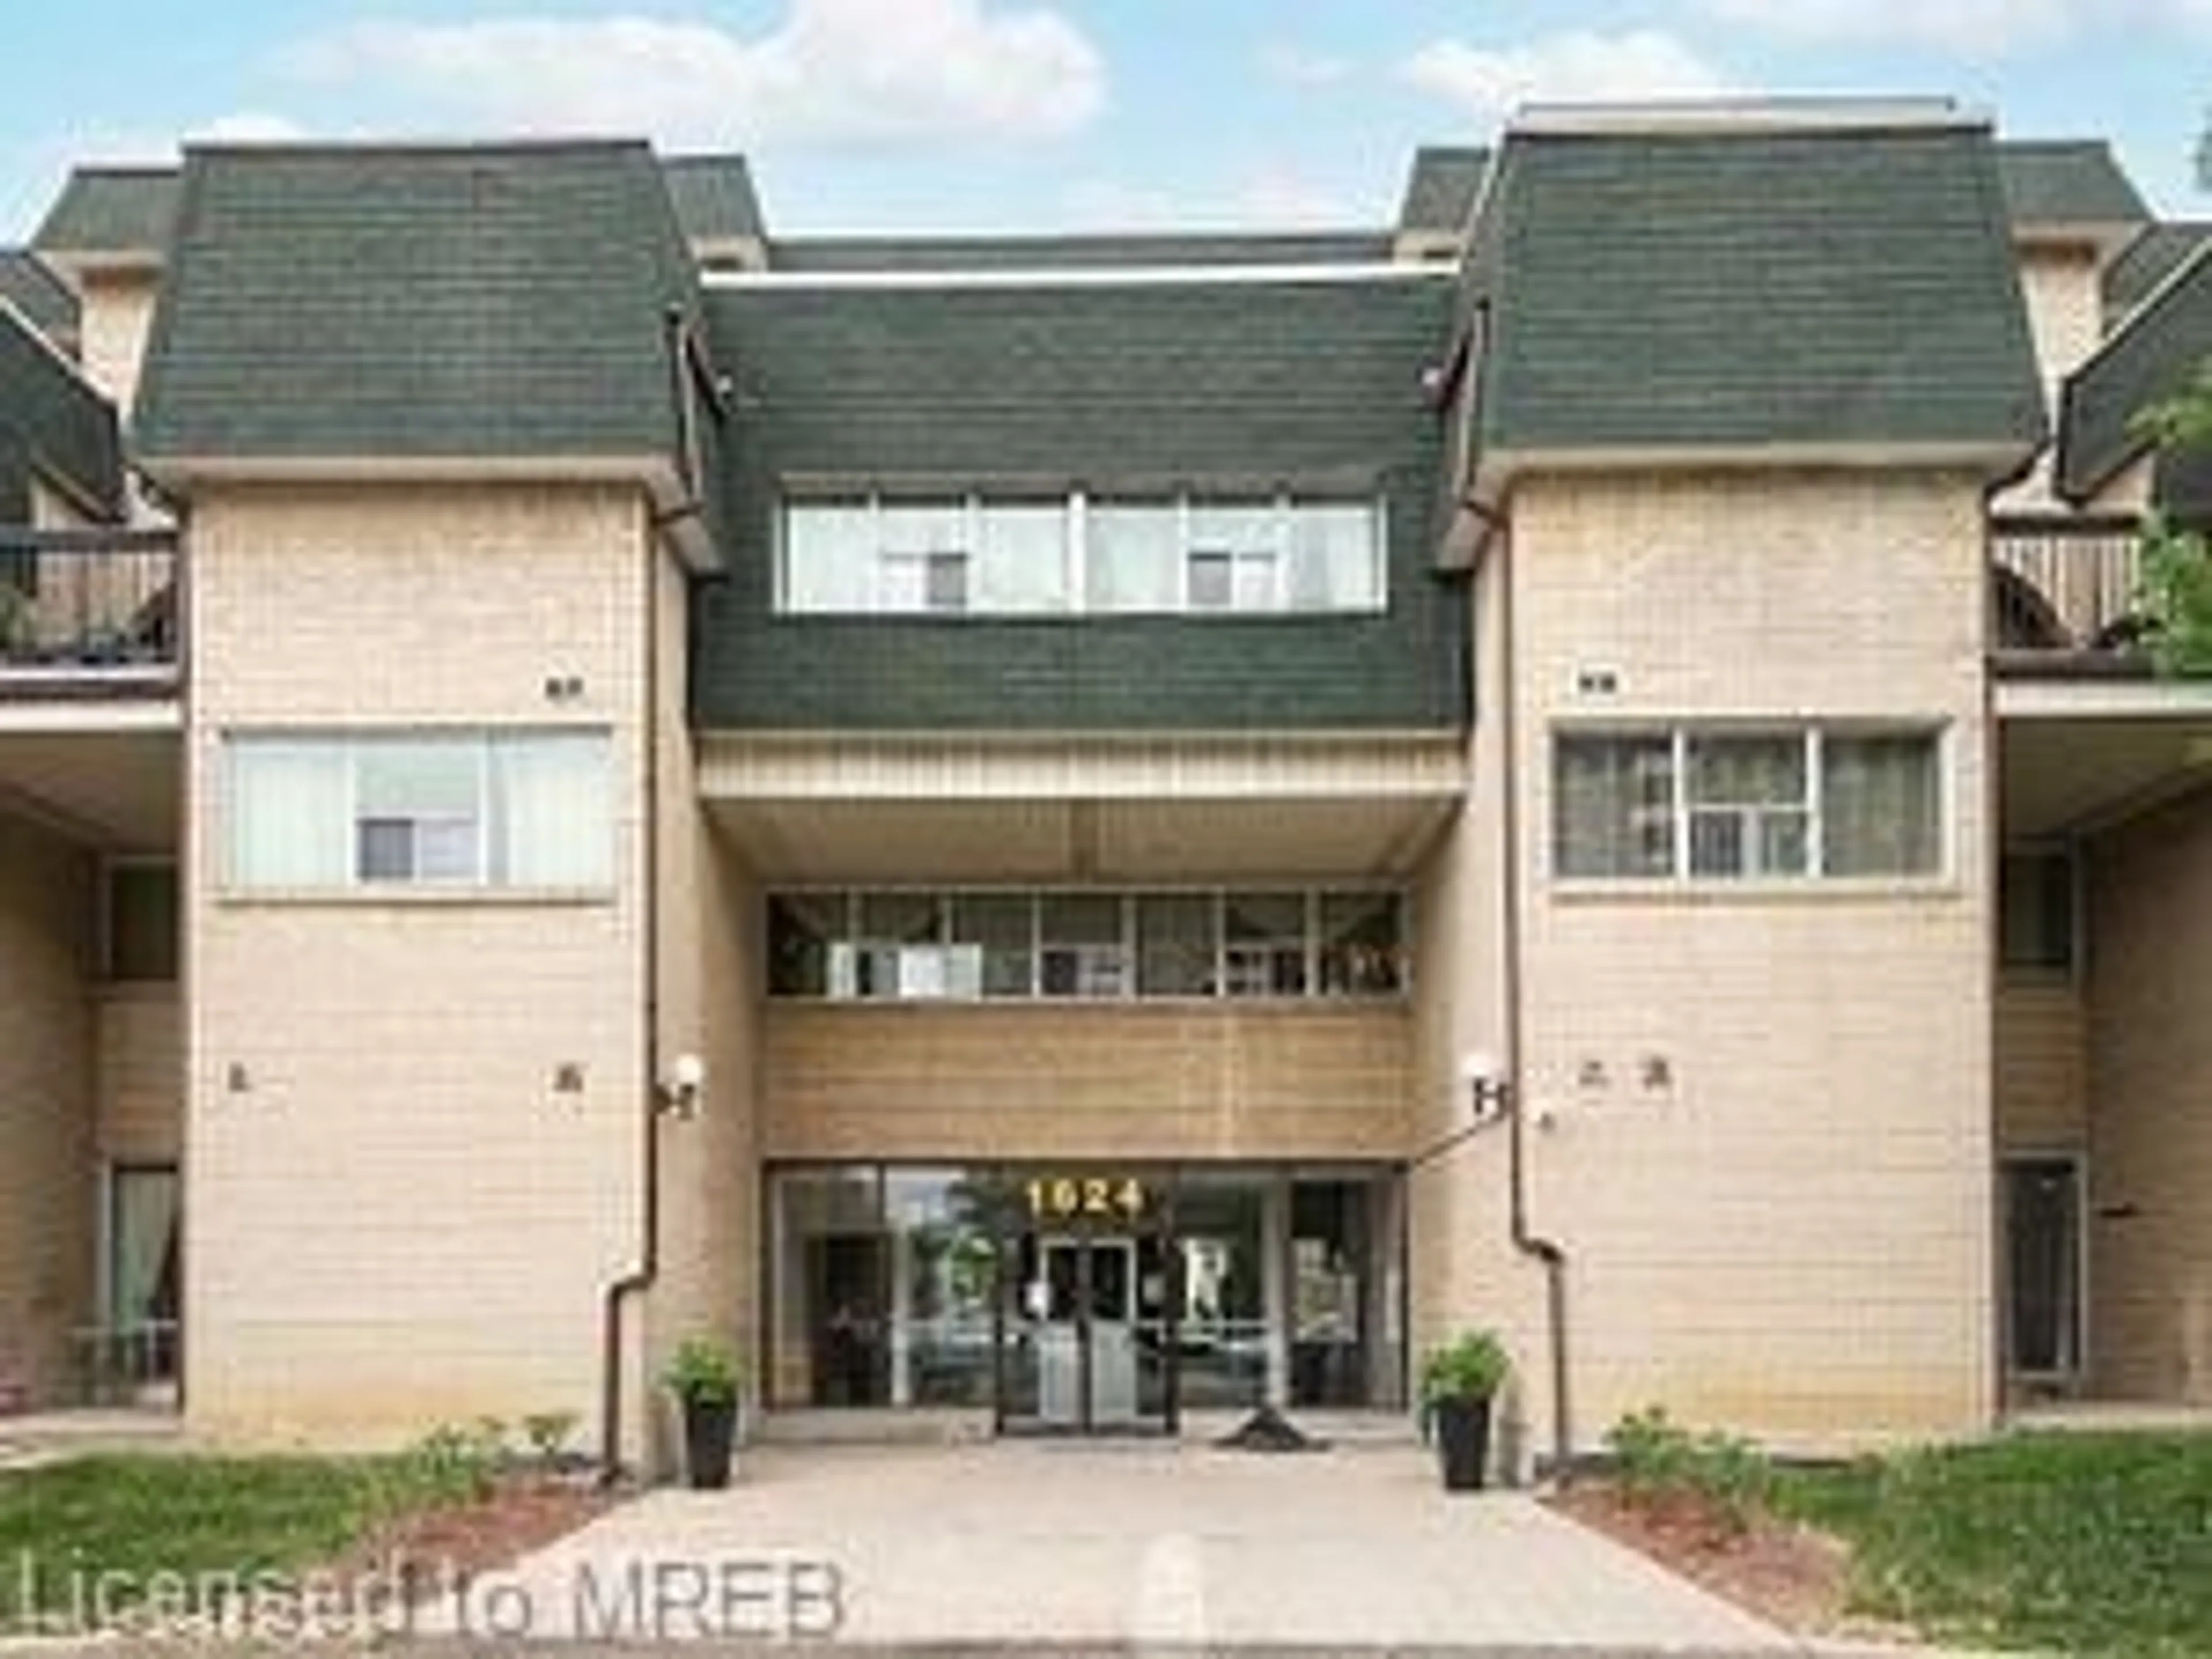 Outside view for 1624 Bloor St, Mississauga Ontario L4X 2S2